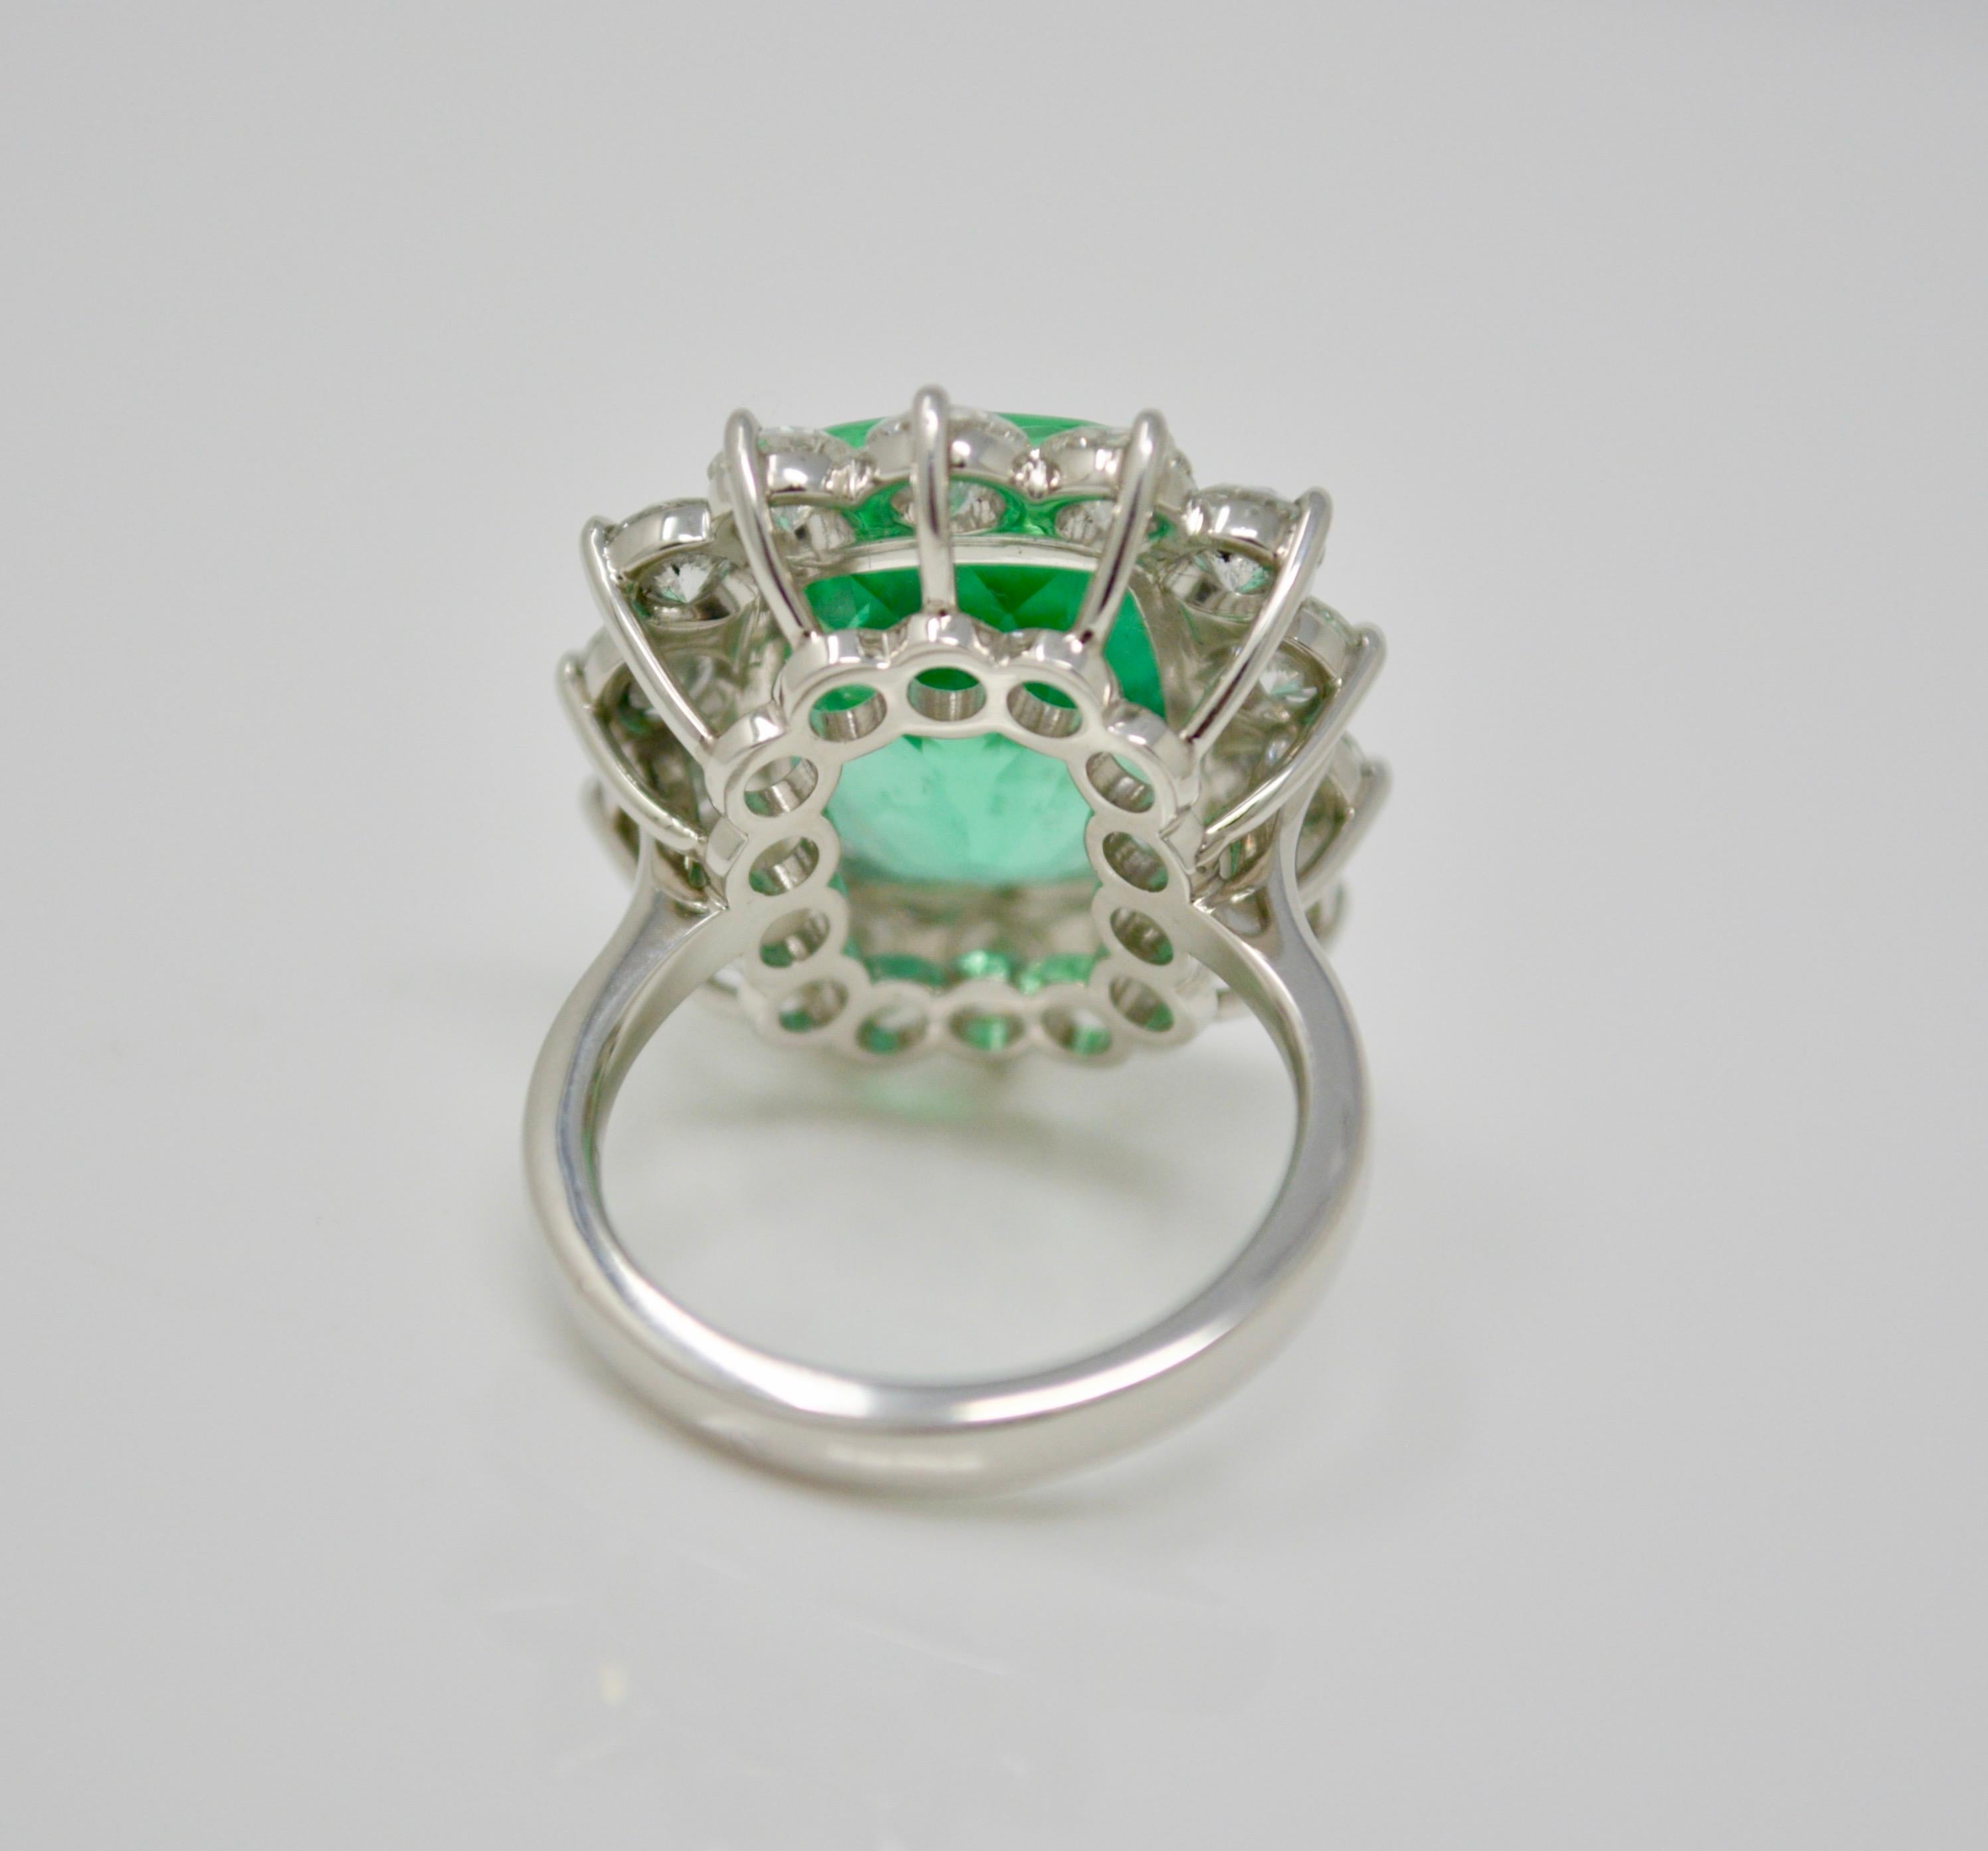 This unique creation by Moguldiam Inc features a Gubelin certified 10.76 carat columbian cushion shaped luscious green emerald surrounded by  beautiful white circular cut diamonds. This is a beautiful and vibrant  columbian emerald. The fourteen